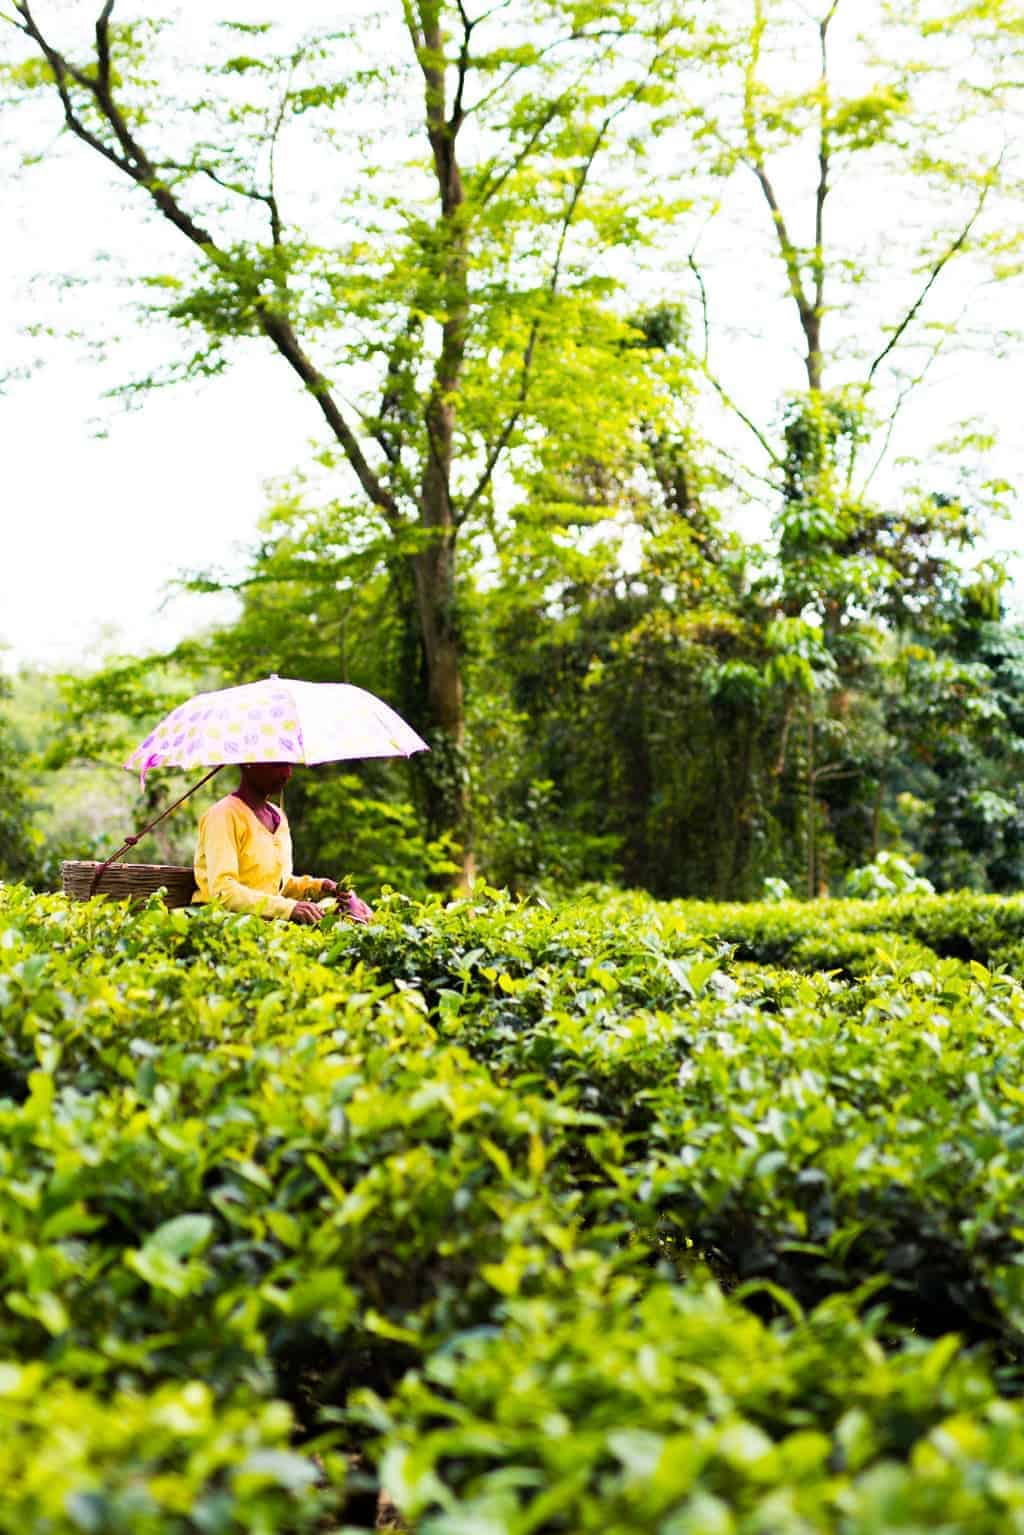 Assam, the largest producer of tea in the world is a beautiful north eastern state in India, lush with tea gardens, culture and history. Visit this far away state to go tea picking, taste the best black teas and eat delicacies like pork, bamboo shoot curry, banana flour and hard to find herbs.